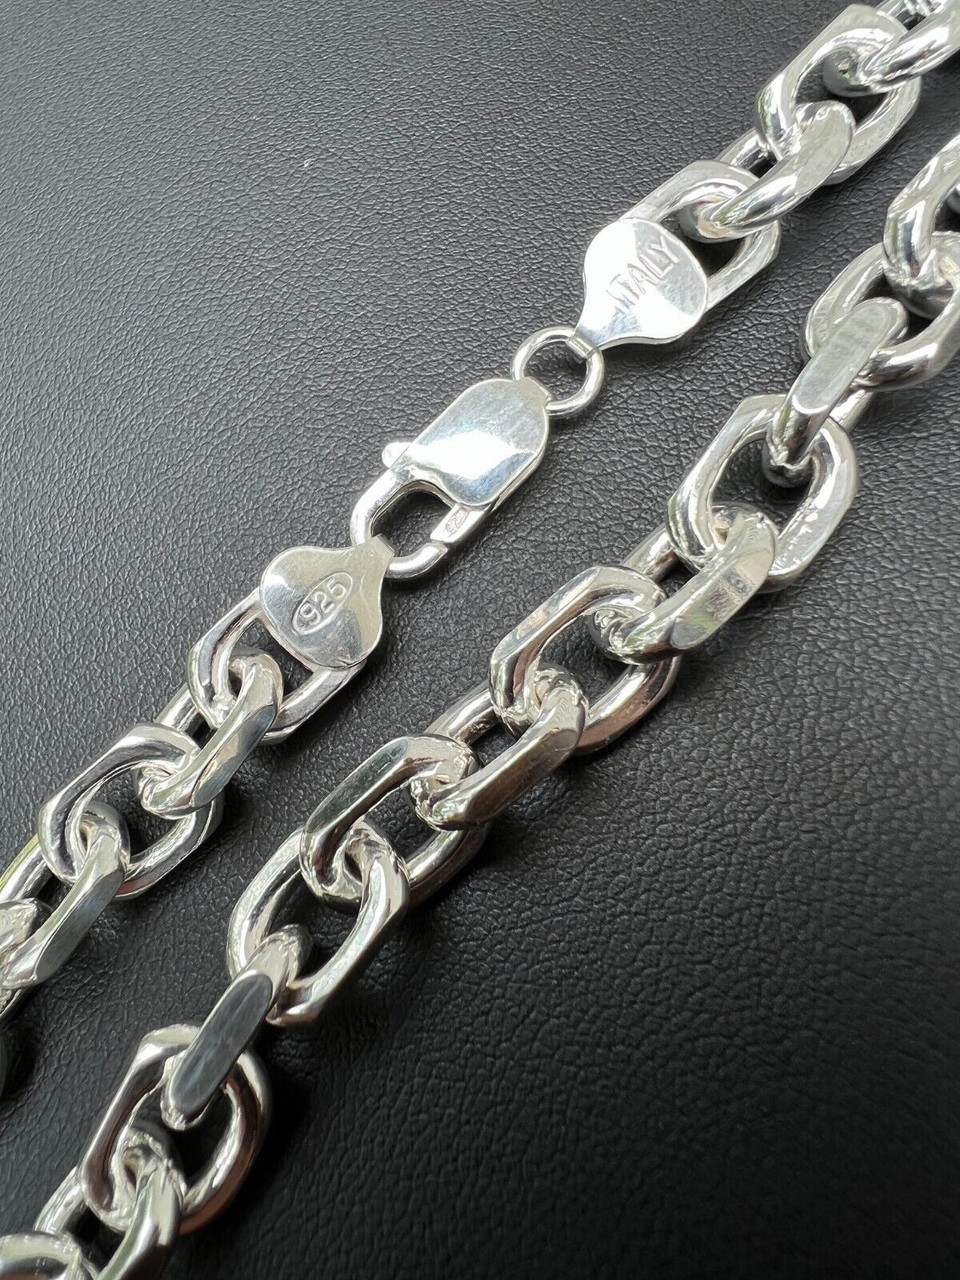 Handmade 925 Sterling Silver Anchor Chain Necklace Italian Cable